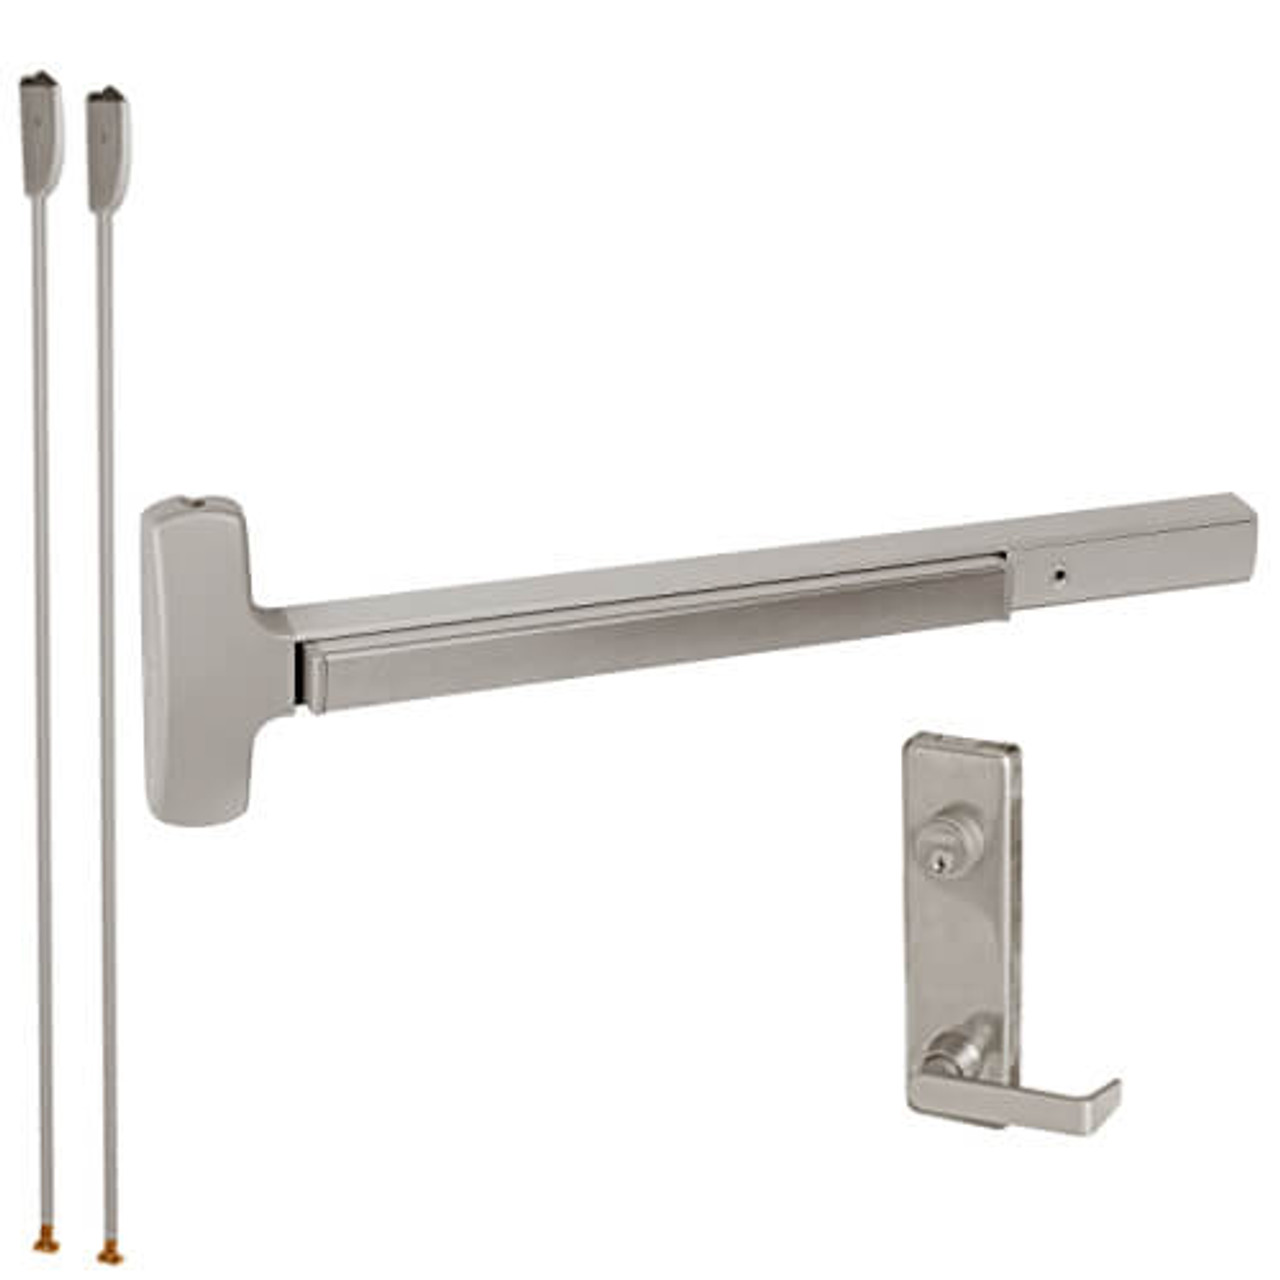 25-V-L-NL-DANE-US32D-3-LHR Falcon Exit Device in Satin Stainless Steel